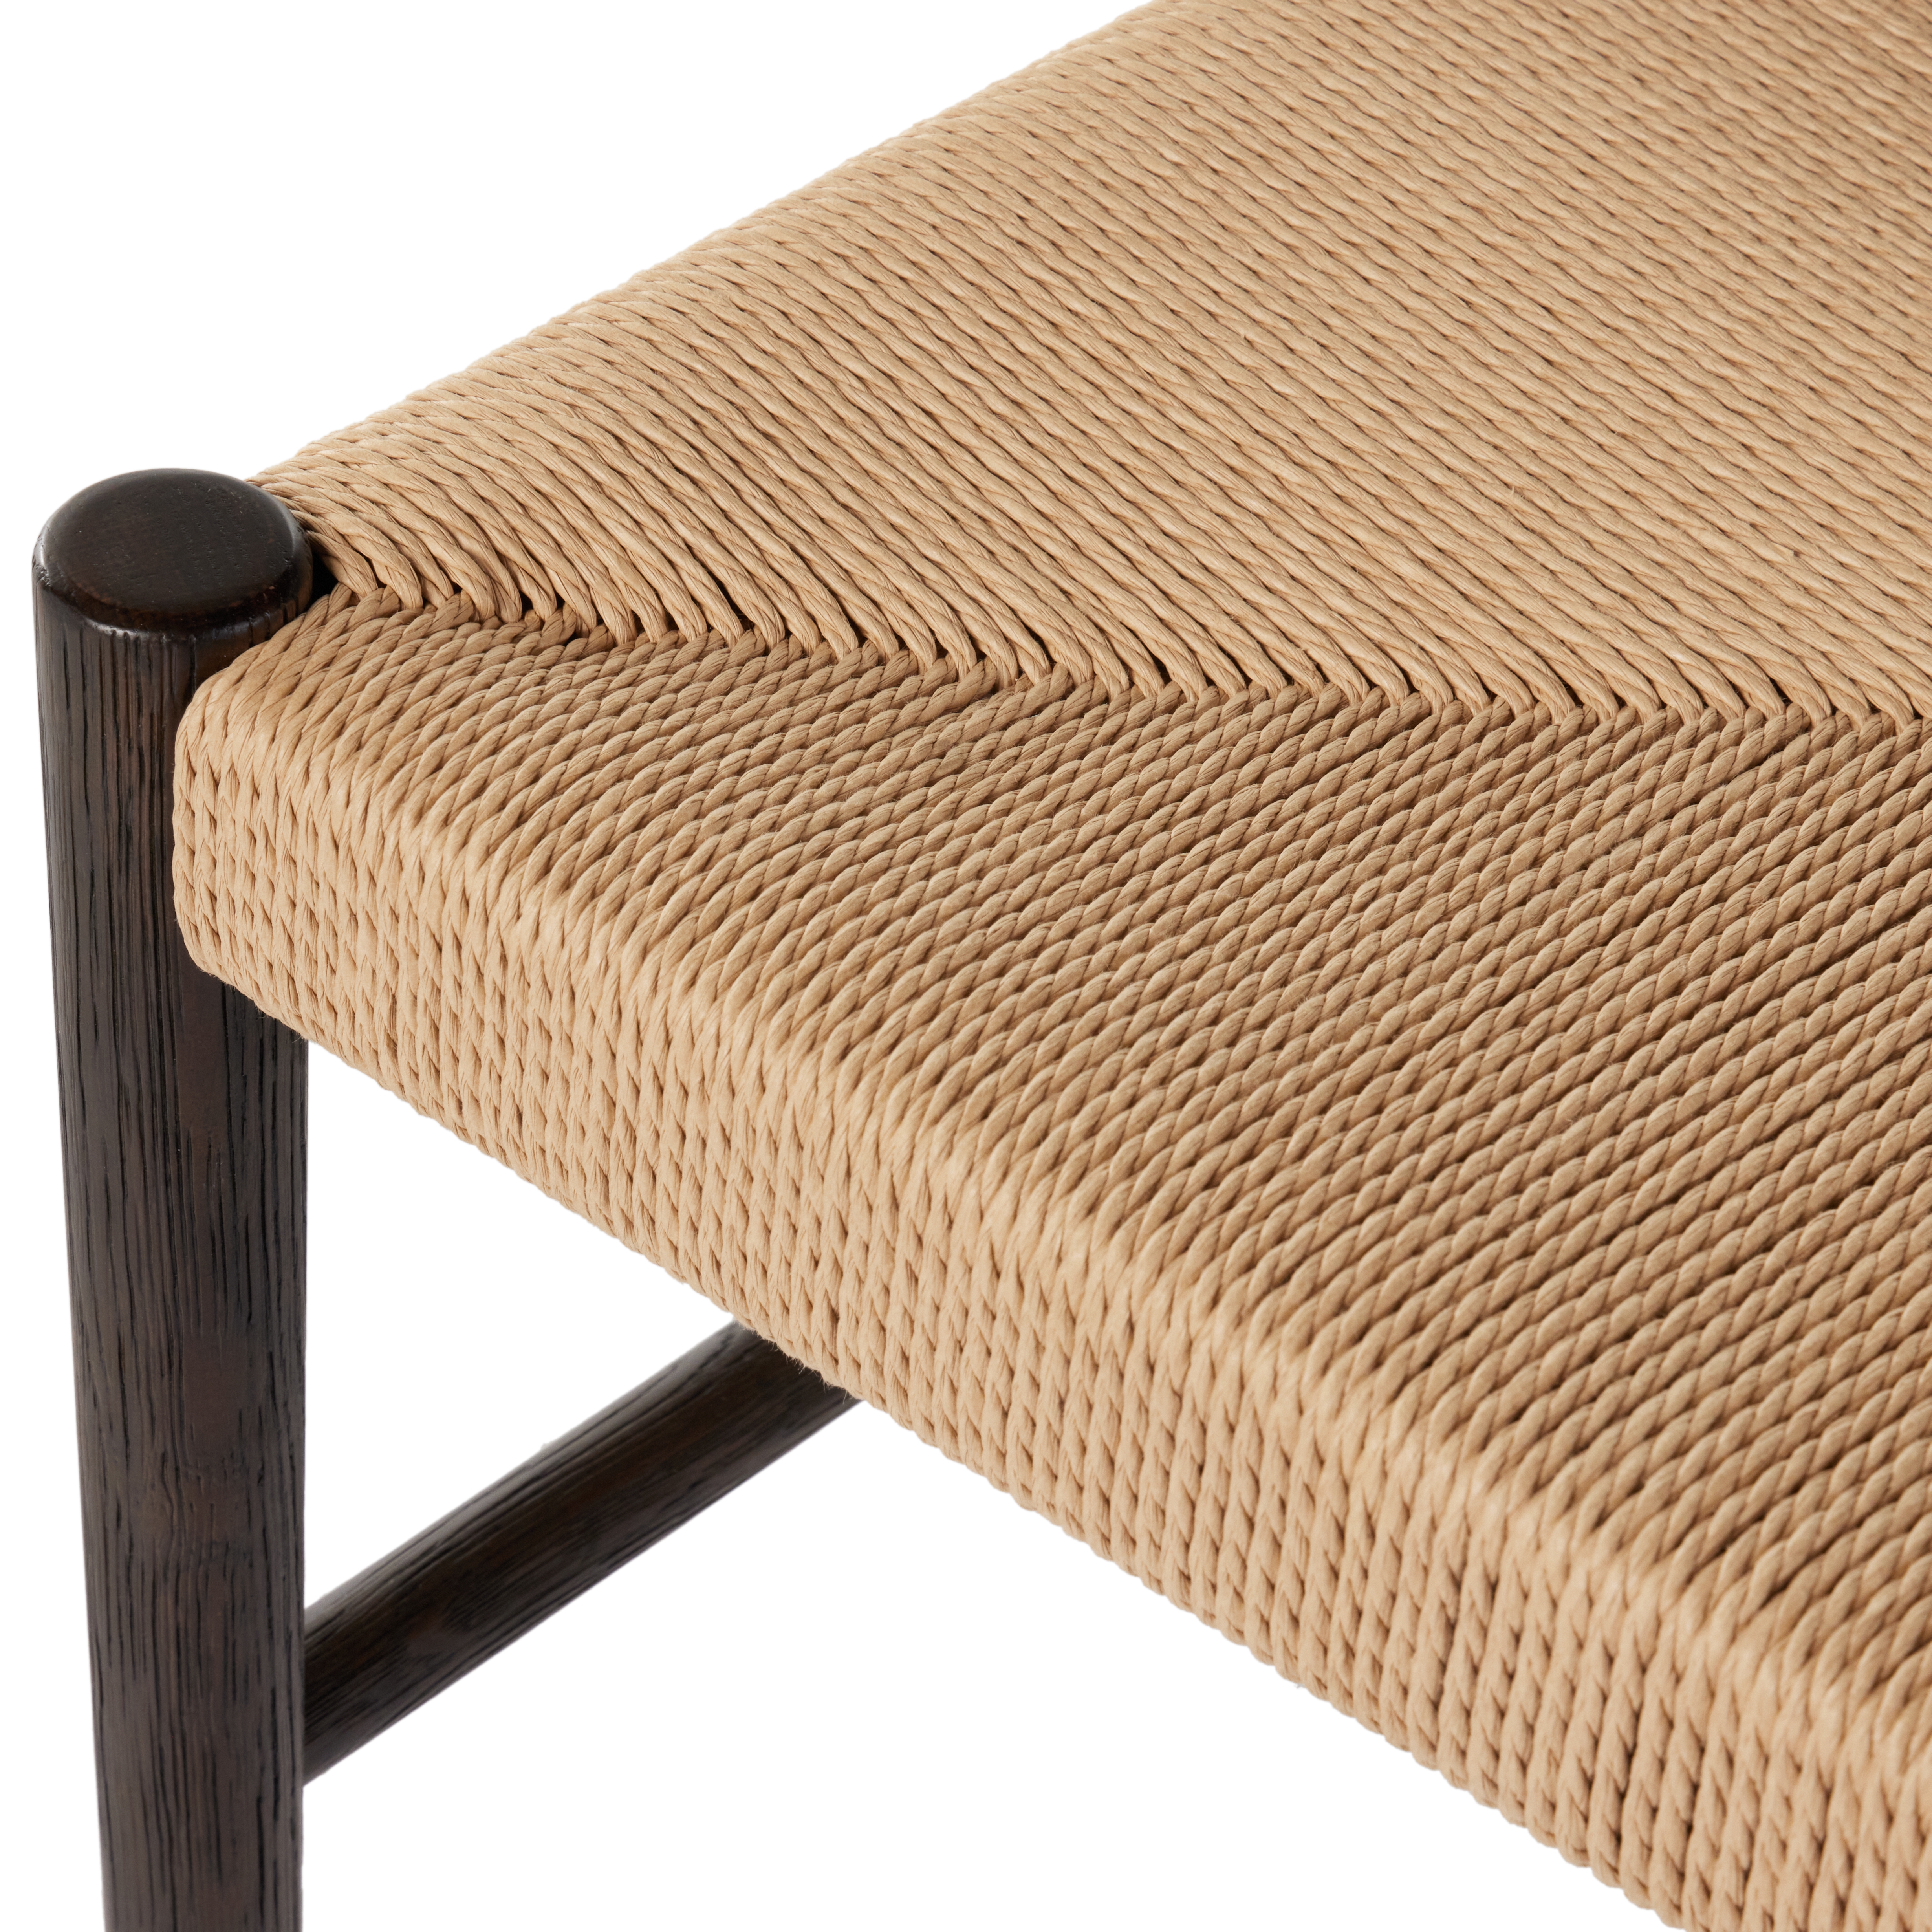 Glenmore Woven Dining Chair-Light Carbon - Image 8